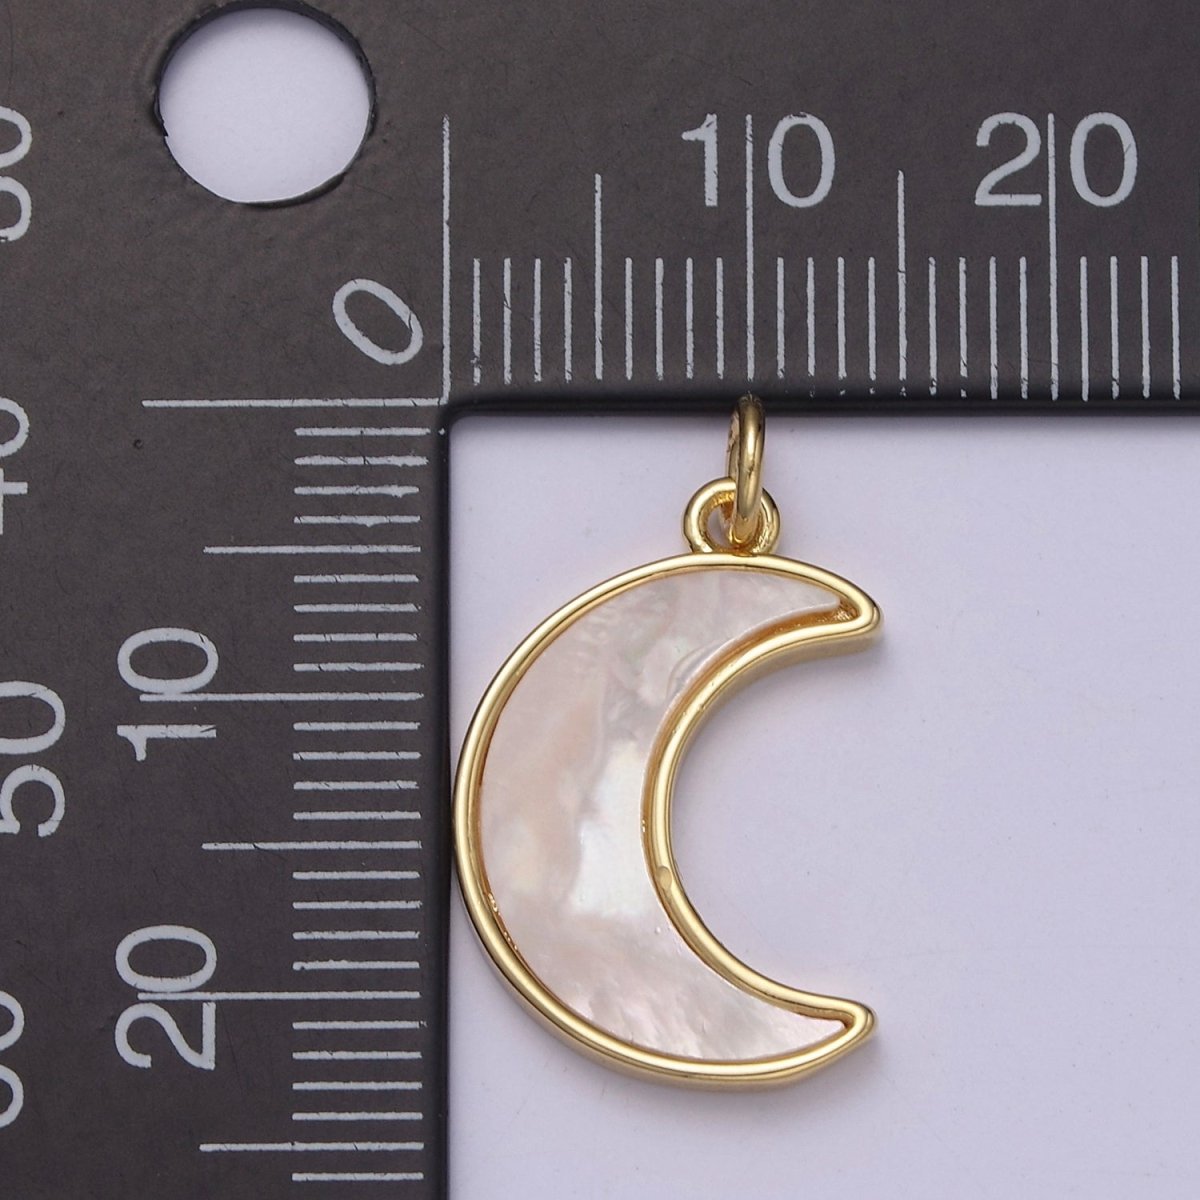 Dainty Crescent Moon Pendant Shell Pearl Moon Charm 14k Gold Filled Jewelry Supplies E-336 - DLUXCA